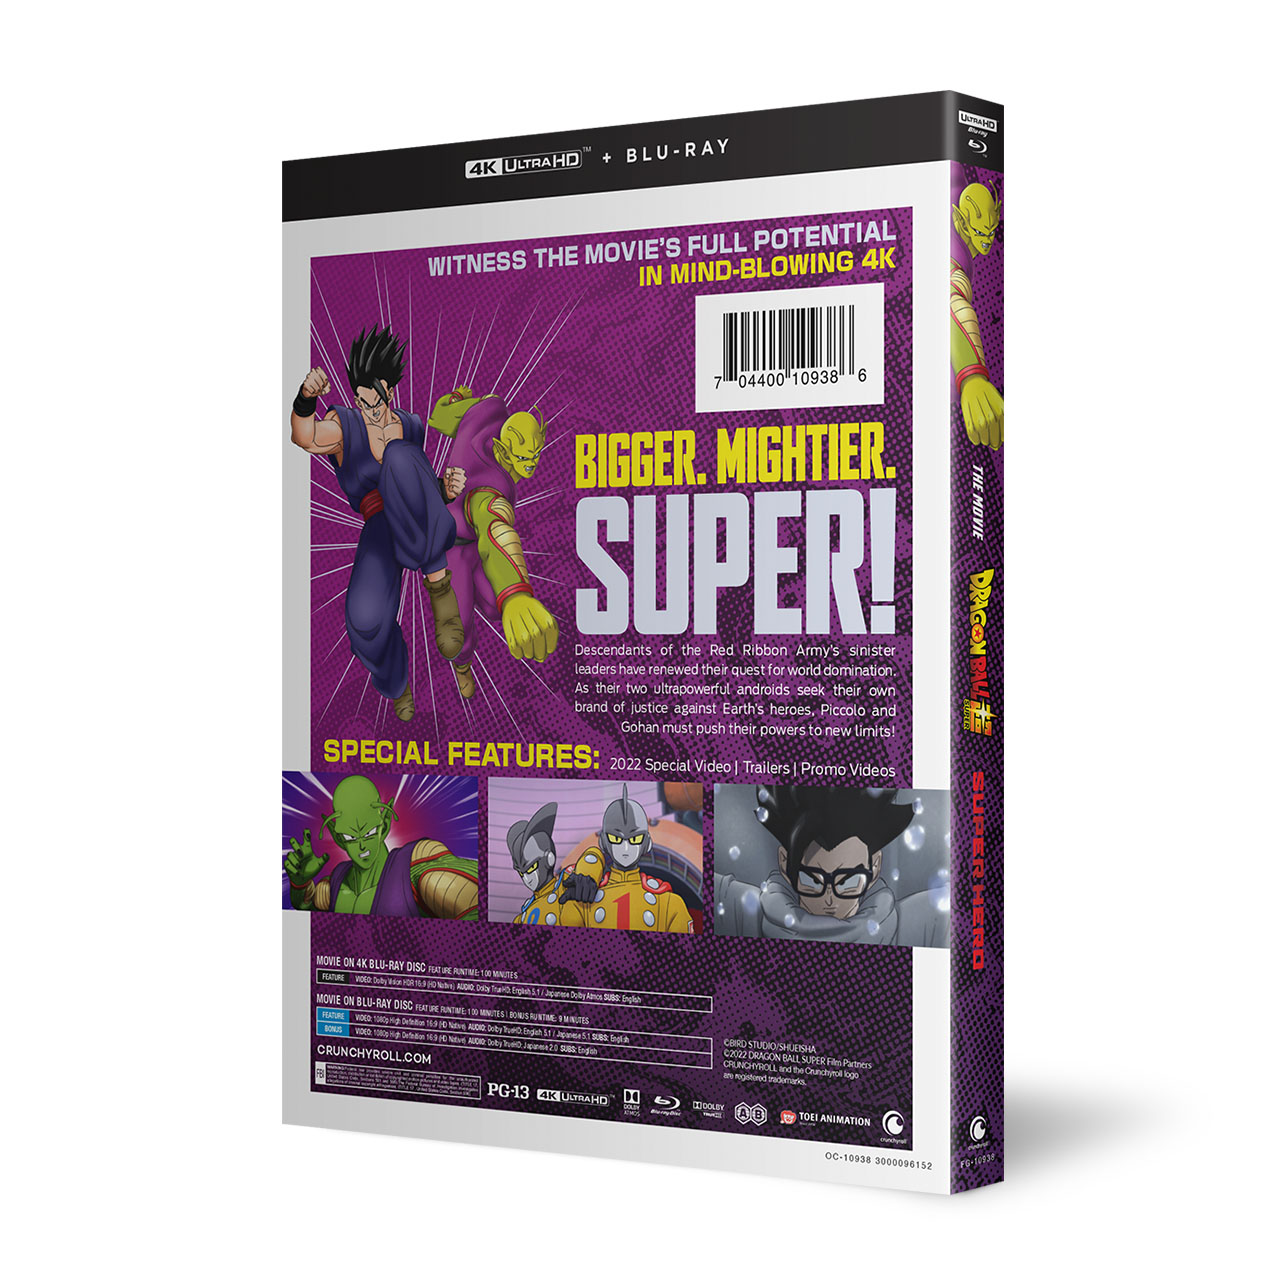 Dragon Ball Super: Super Hero First Limited Edition Booklet Japan Blu-ray